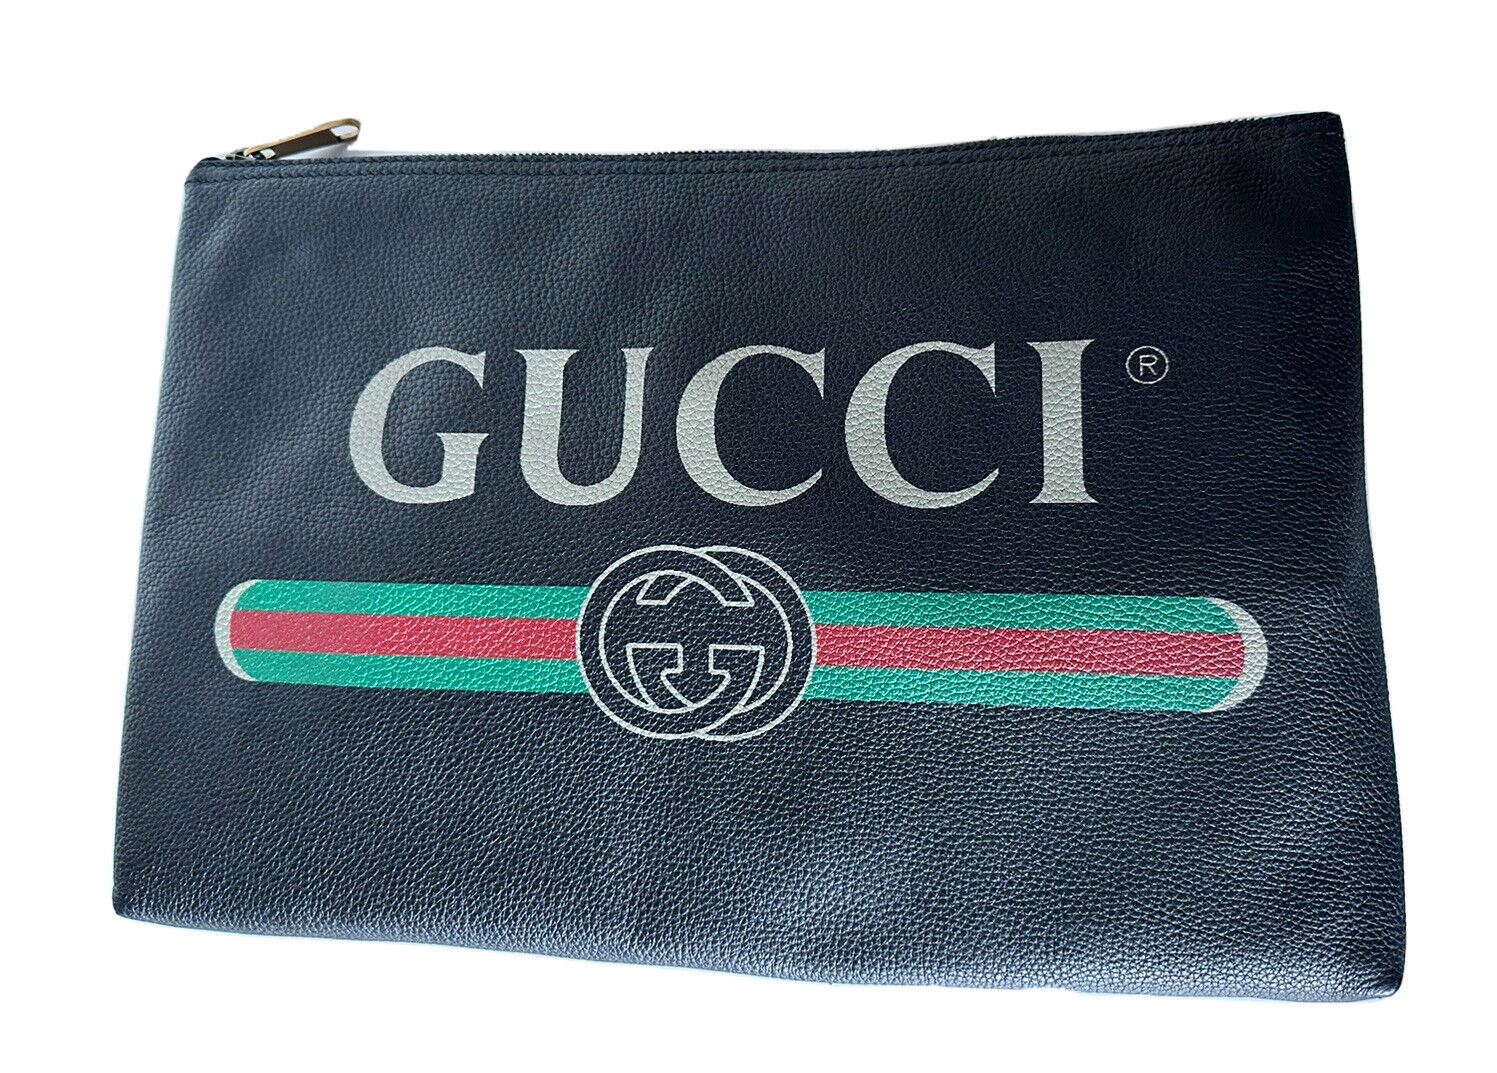 New Gucci G Web Gucci Print Zip Around Black Pouch Made in Italy